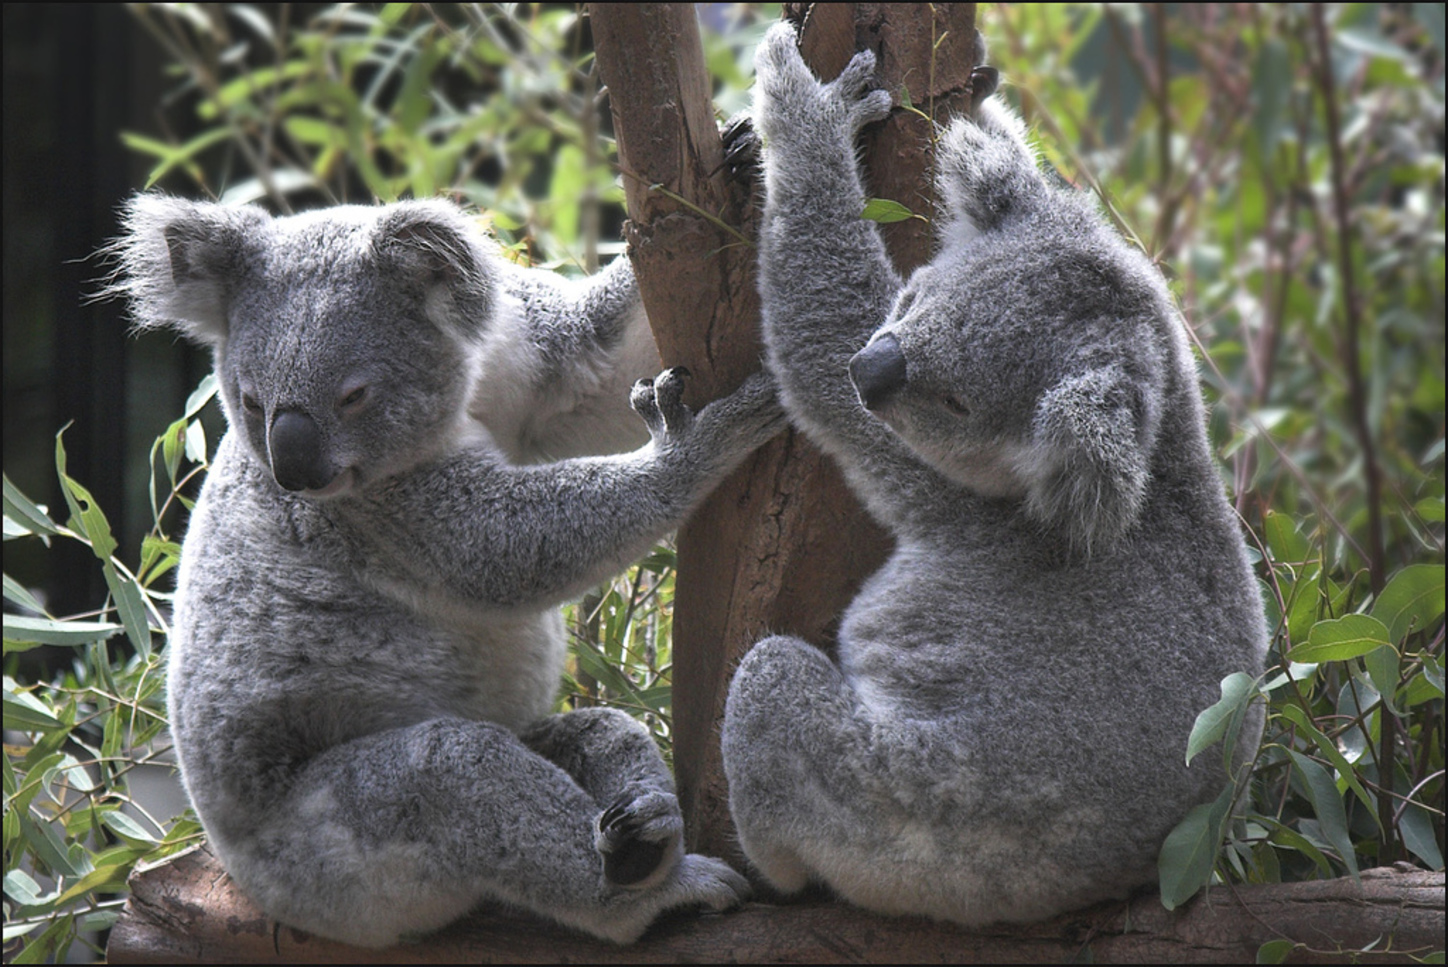  Koalas have declined 50% in Queensland over the past 15-20 years. Mike Locke/Flickr, CC BY-ND 